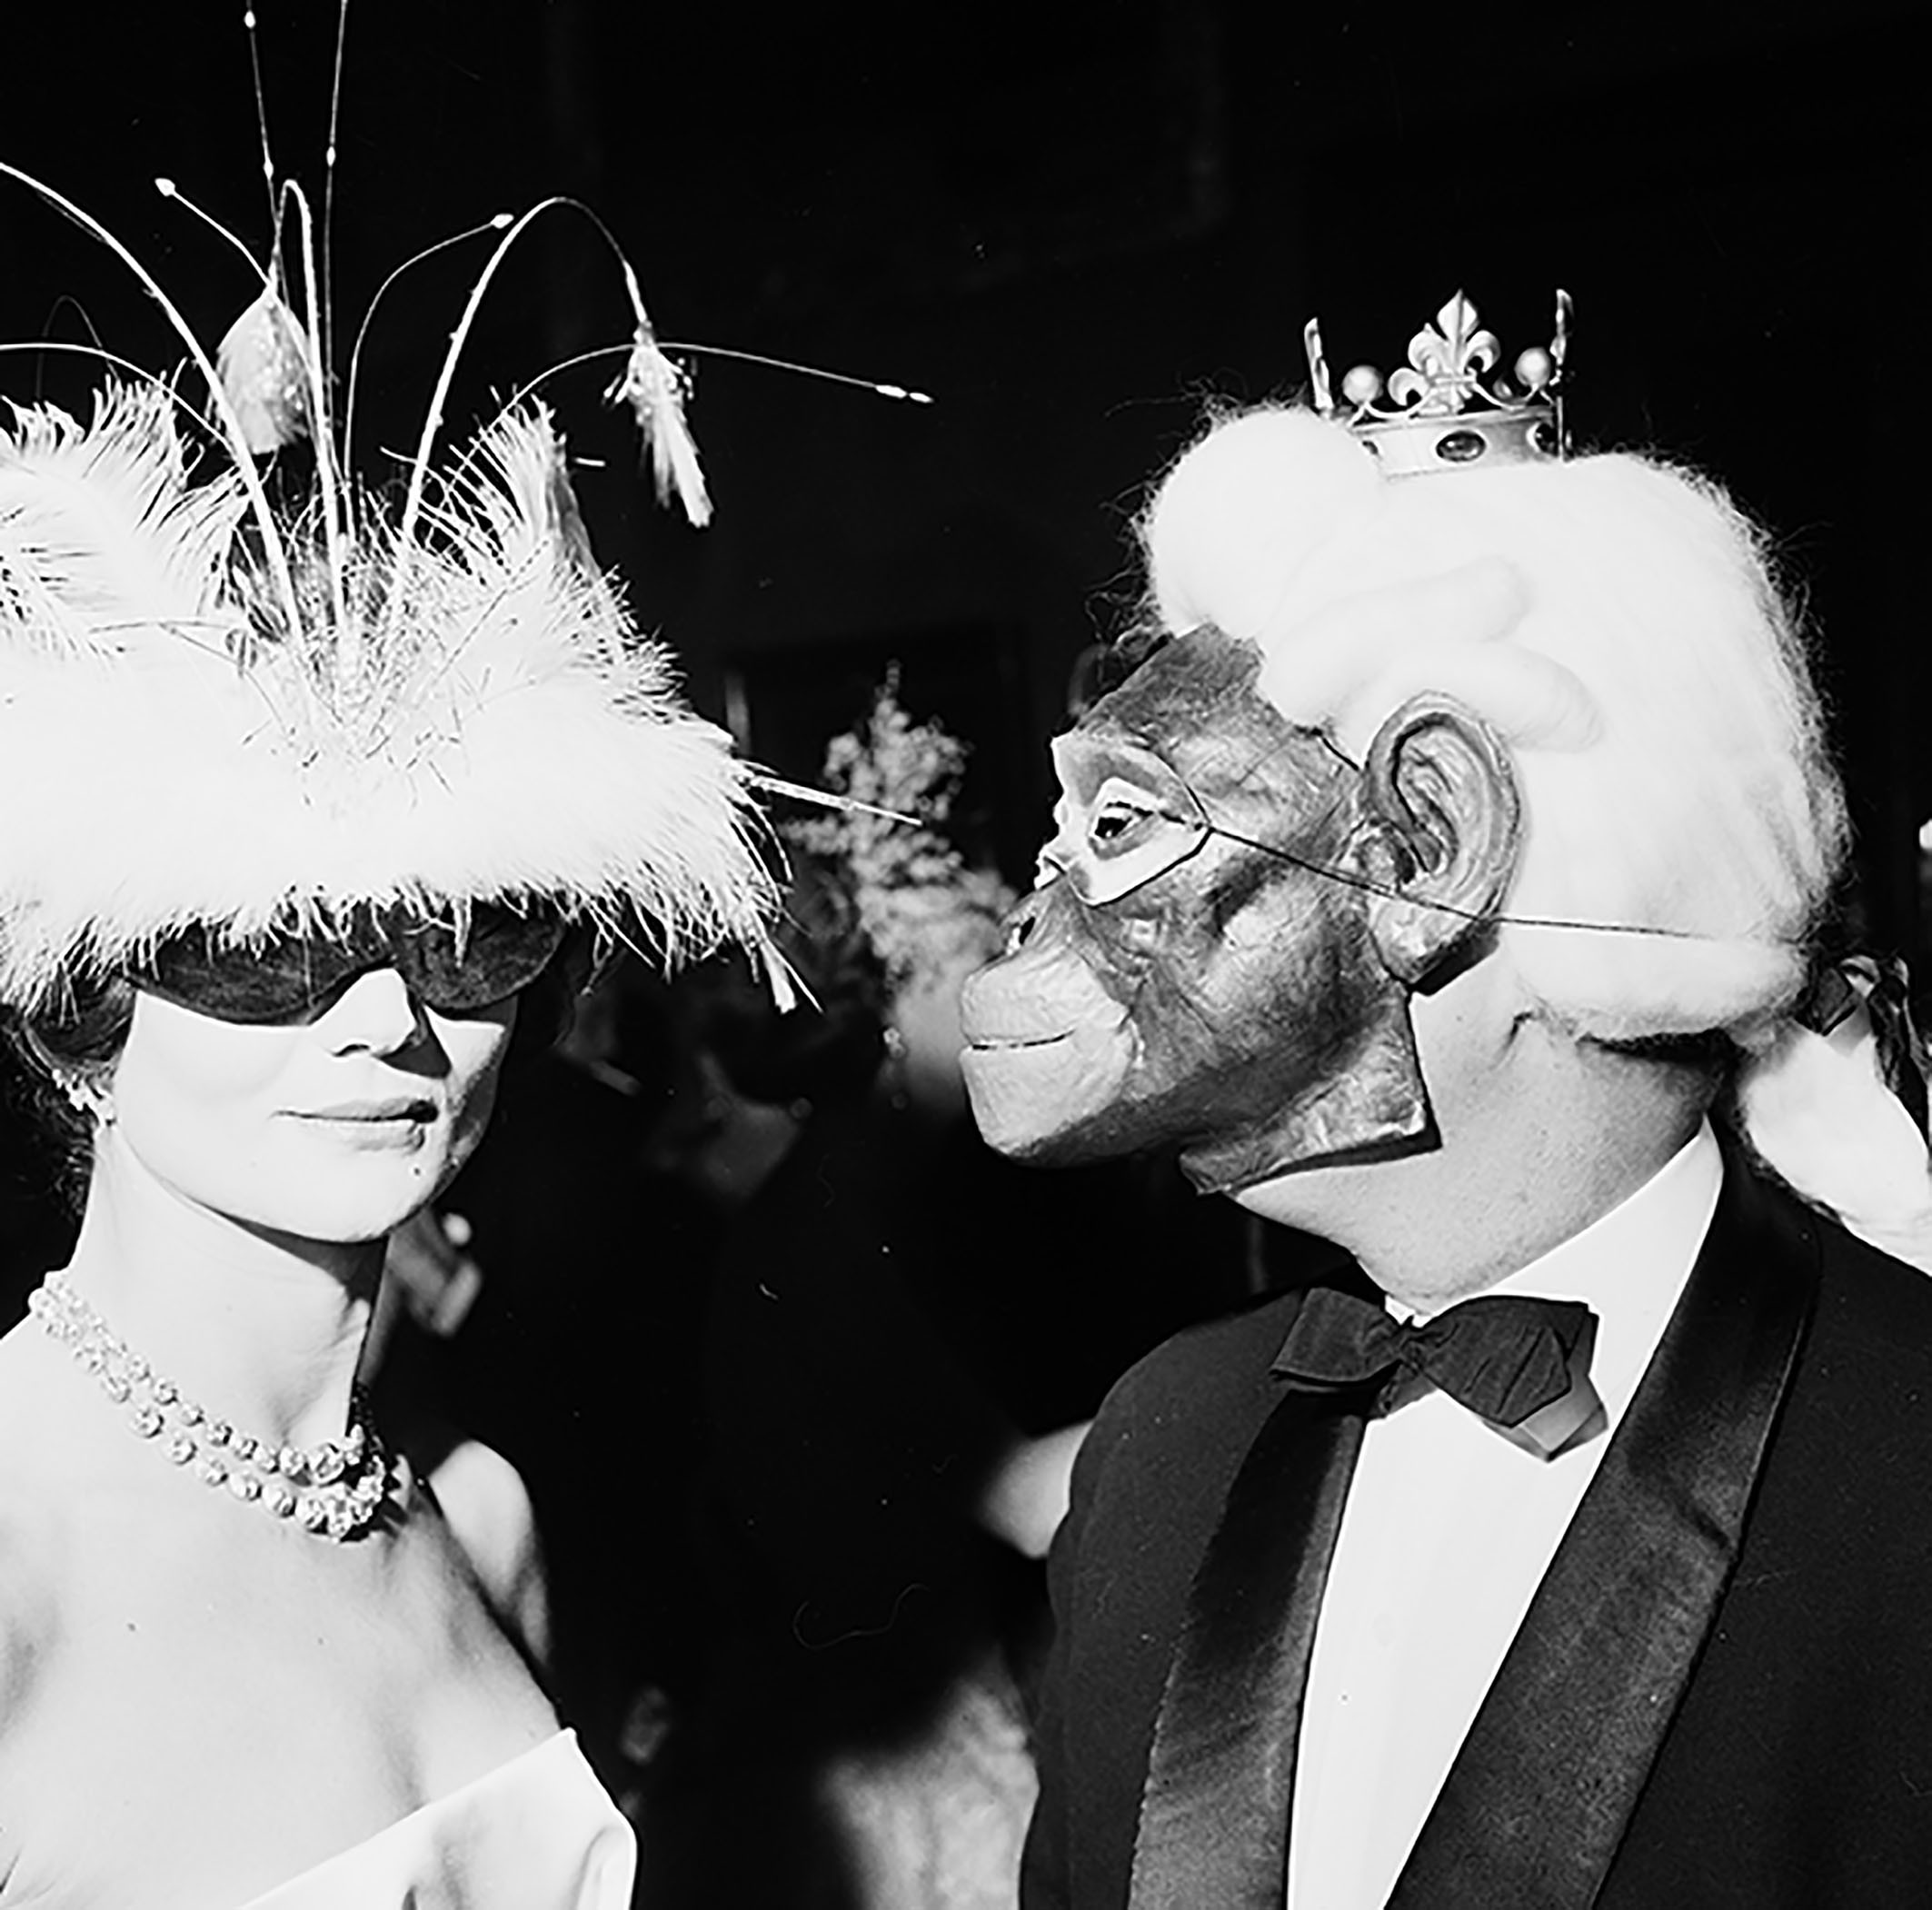 <BODY><div>André Ostier, Vicomtesse de Ribes und Pierre Celeyron, Winter Ball, Hotel Coulanges, Paris, 30. Dezember 1958</div><div>© A. & A. Ostier</div><div> </div></BODY>